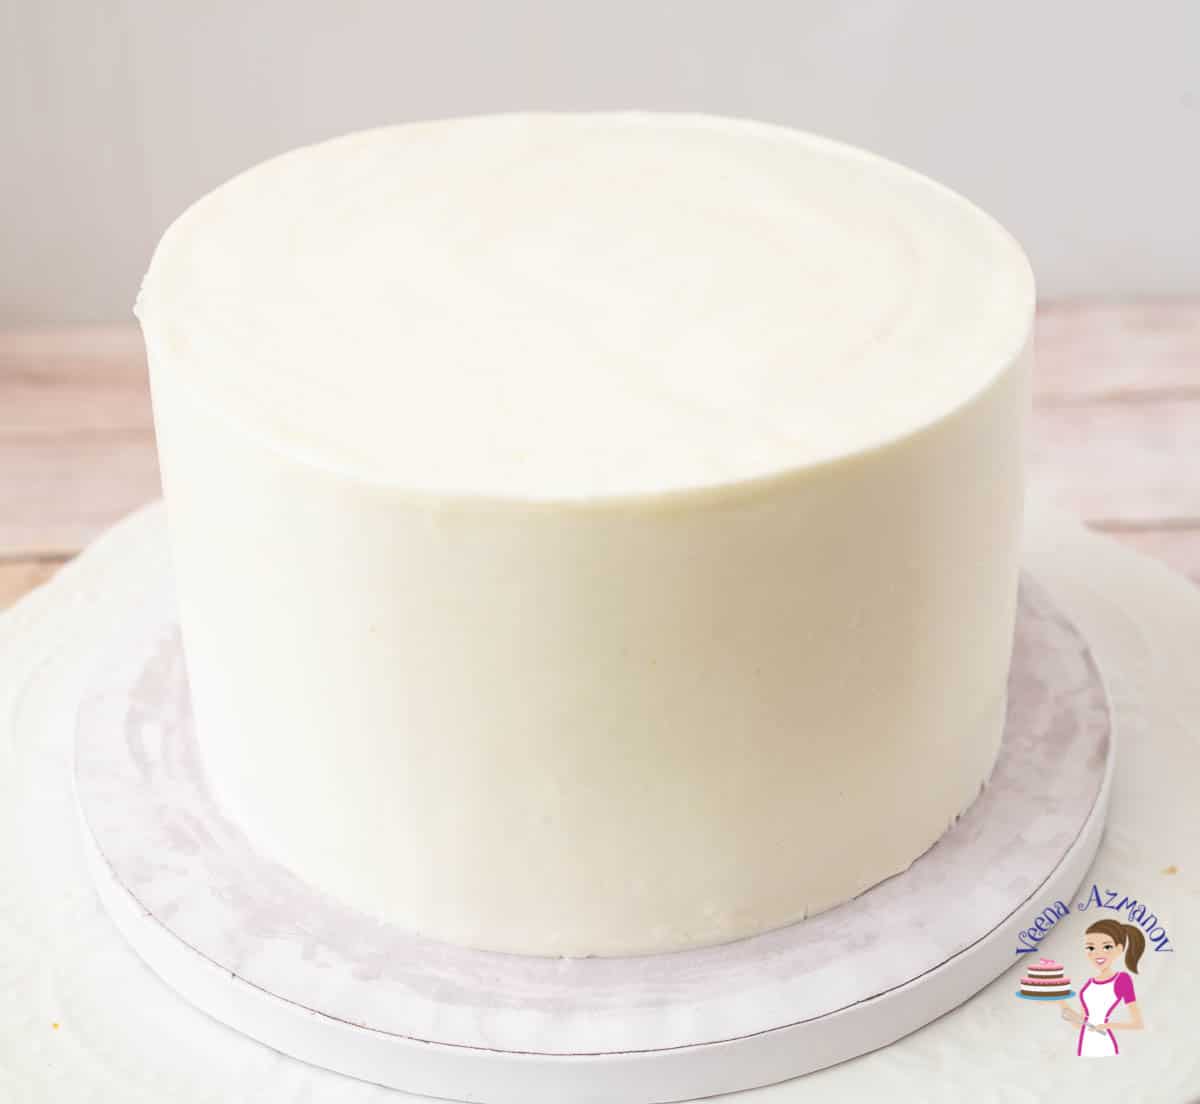 How to Level Torte Fill a cake